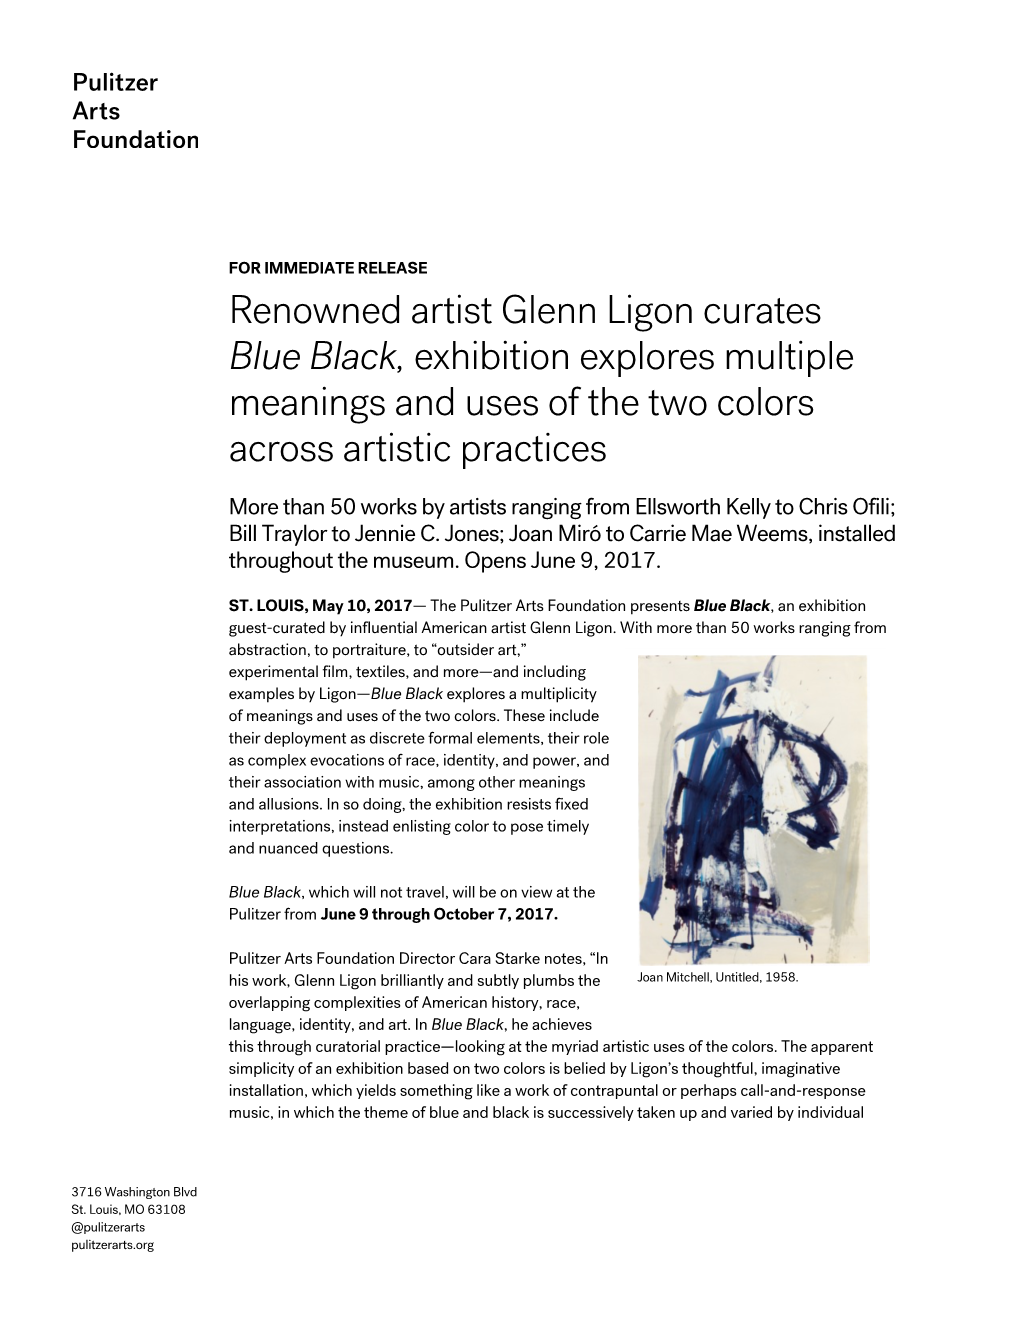 Blue Black, Exhibition Explores Multiple Meanings and Uses of the Two Colors Across Artistic Practices